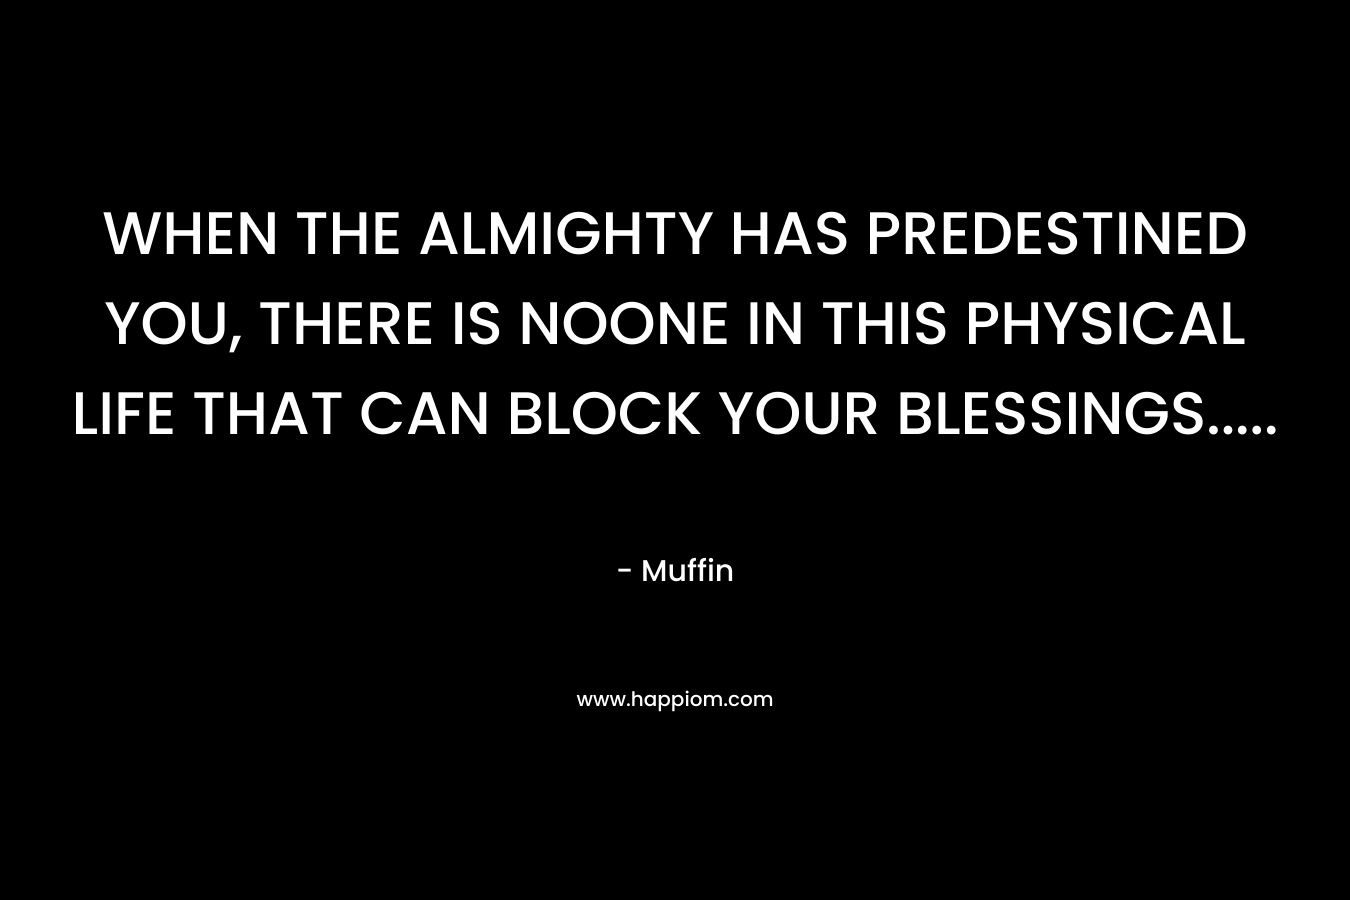 WHEN THE ALMIGHTY HAS PREDESTINED YOU, THERE IS NOONE IN THIS PHYSICAL LIFE THAT CAN BLOCK YOUR BLESSINGS….. – Muffin